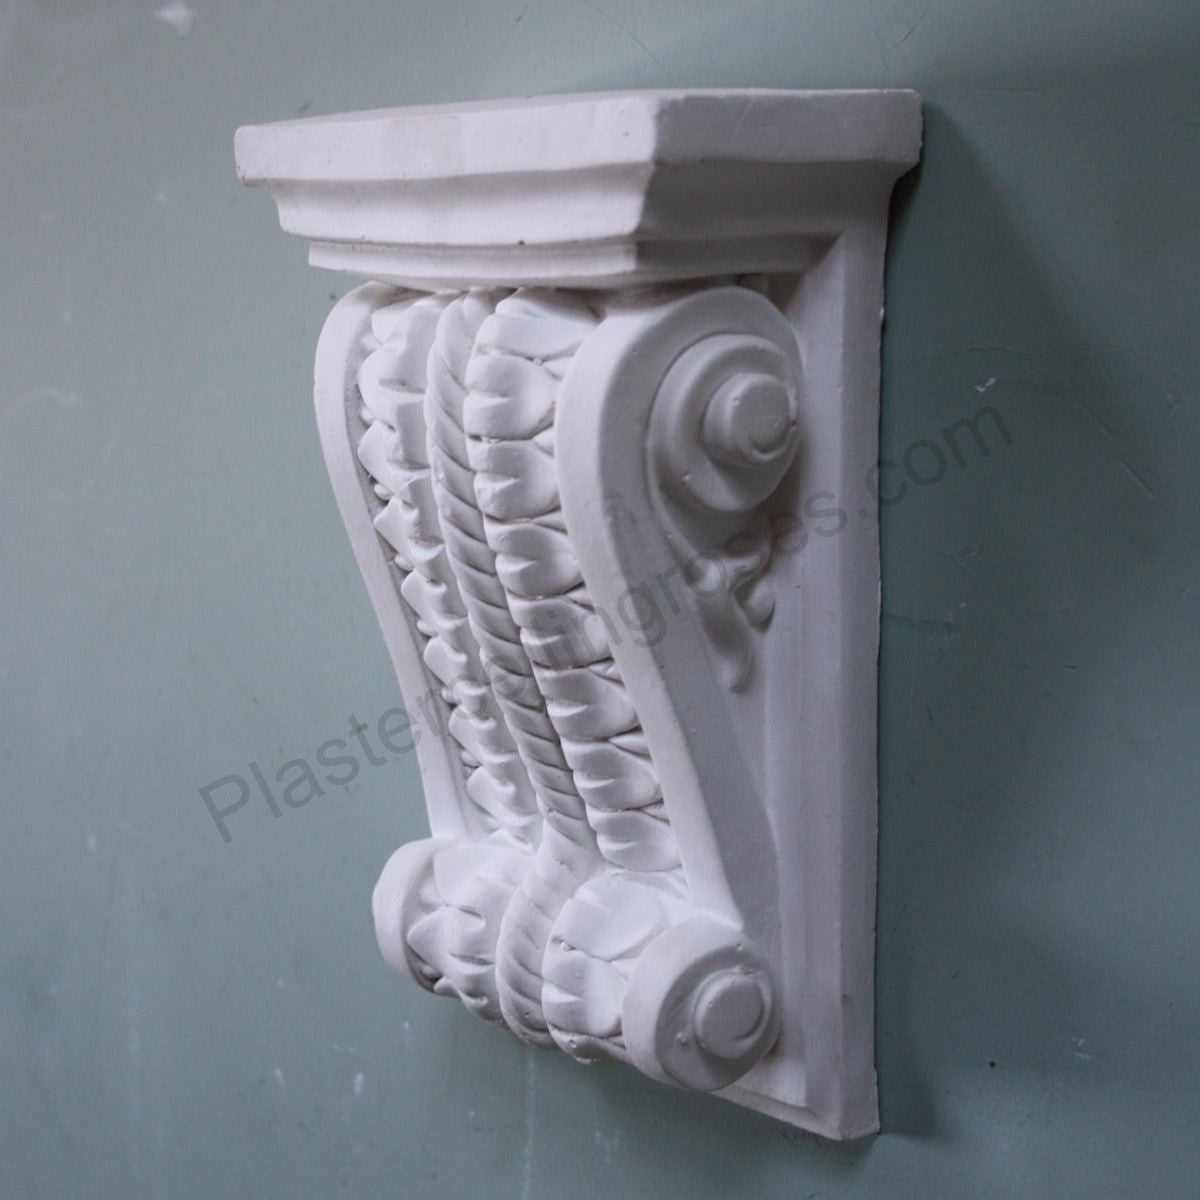 Small Decorative Plaster Corbel from side angle